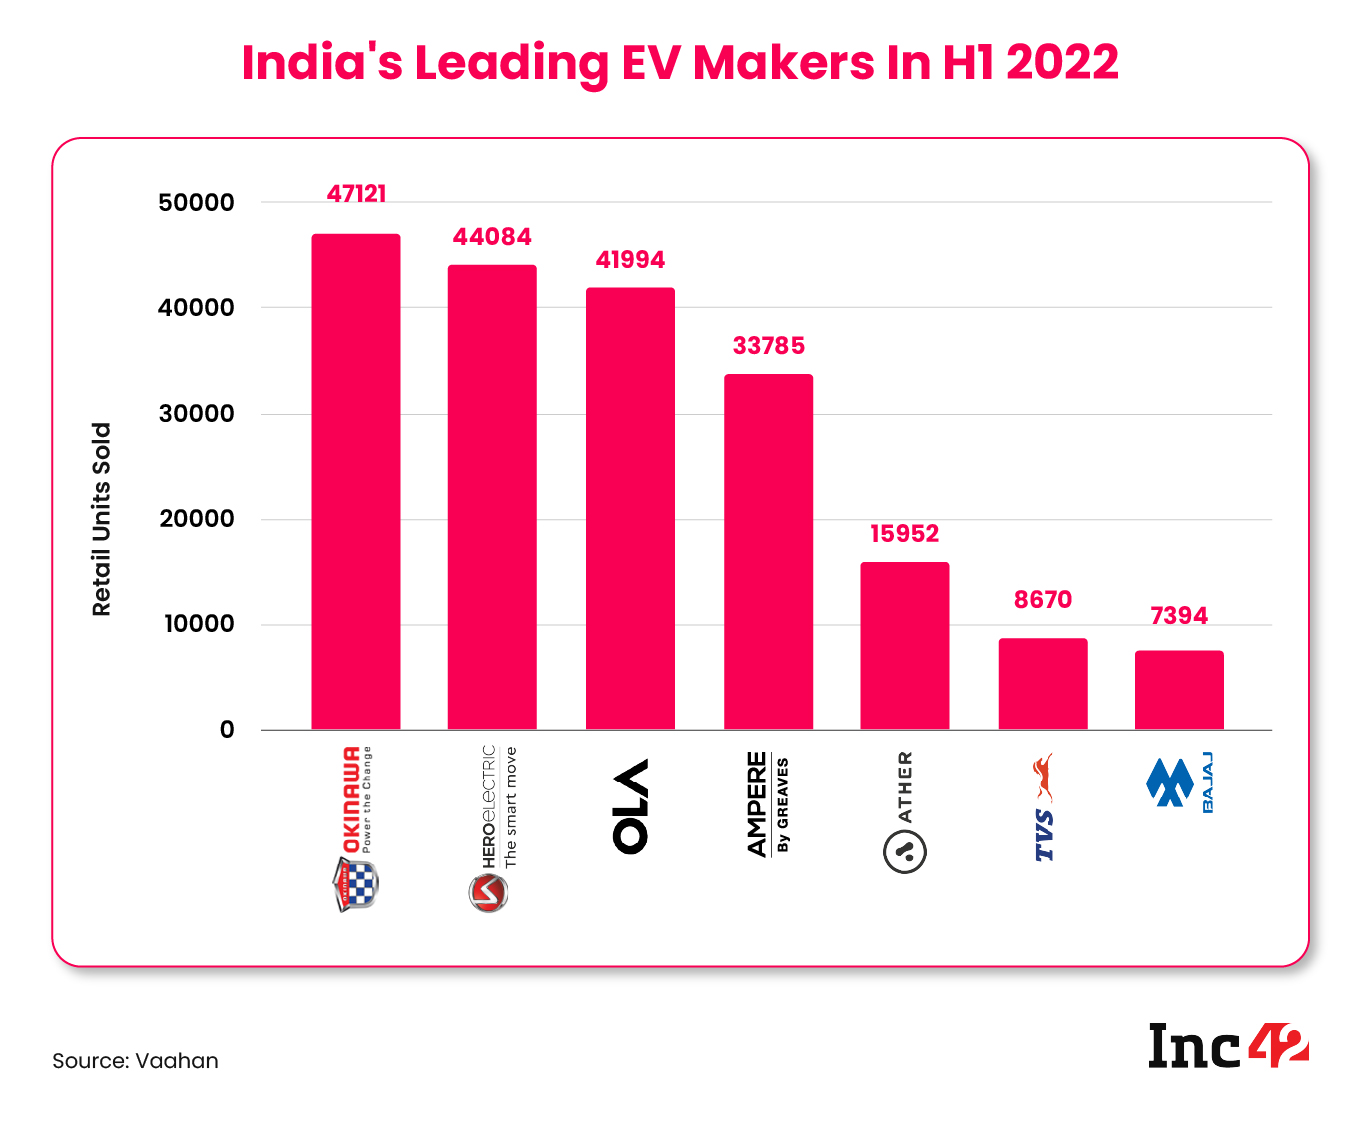 India's leading EV makers in H1 2022